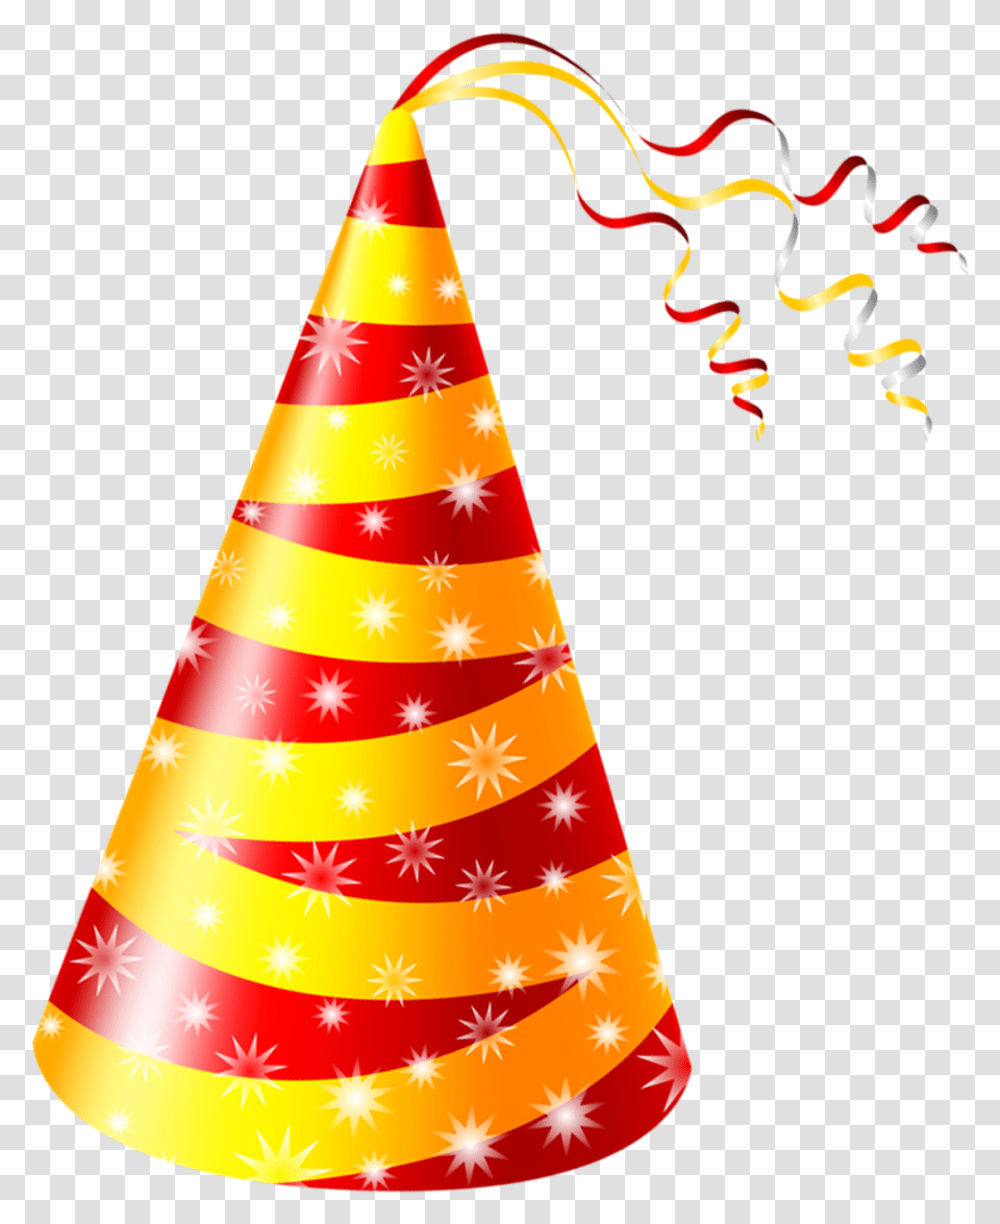 Cone Clipart Cone Hat Happy Birthday Cap, Apparel, Party Hat, Ketchup Transparent Png